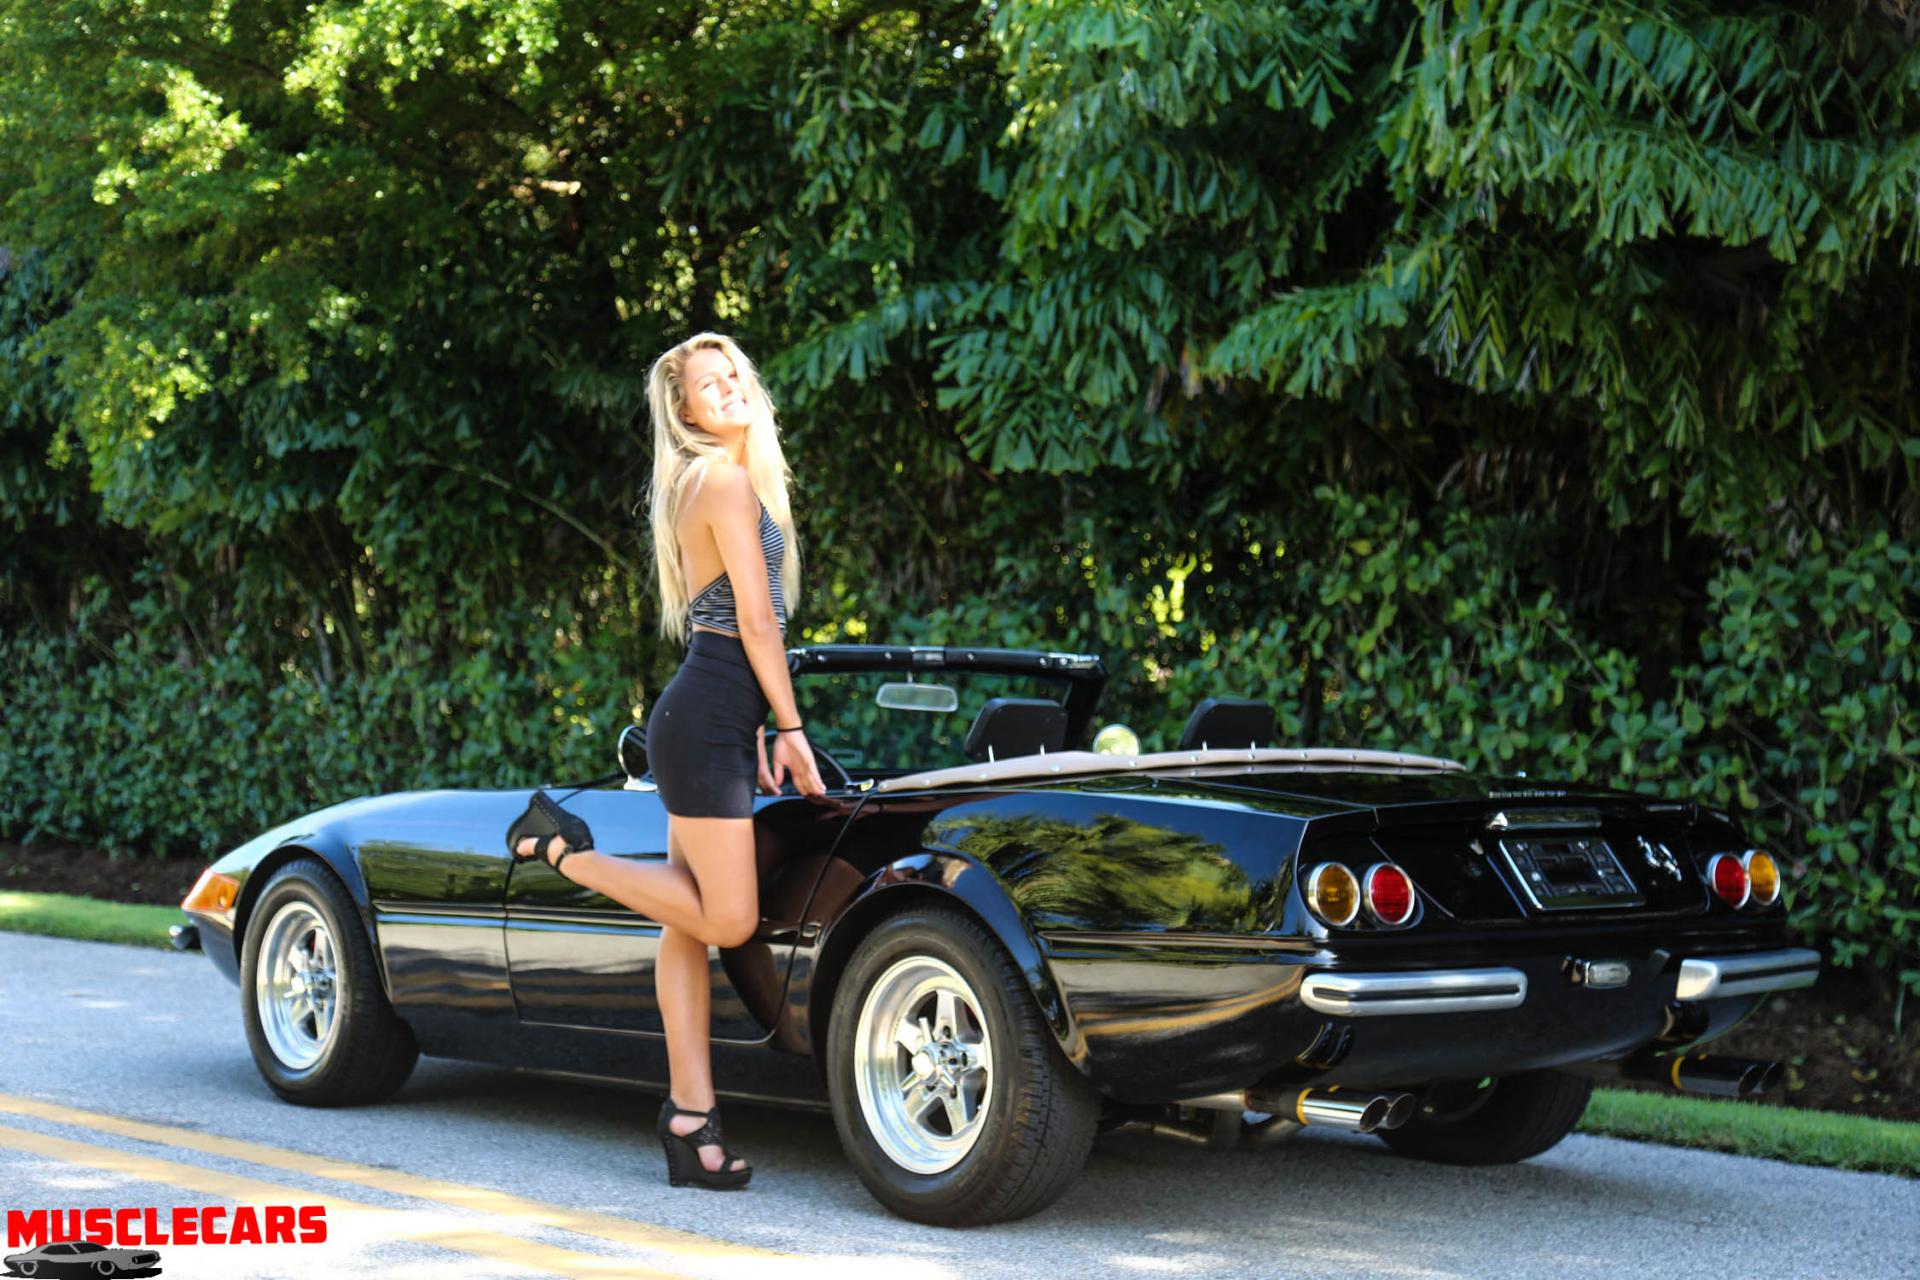 Used 1971 Ferrari Daytona Spyder 365 GTB for sale Sold at Muscle Cars for Sale Inc. in Fort Myers FL 33912 4